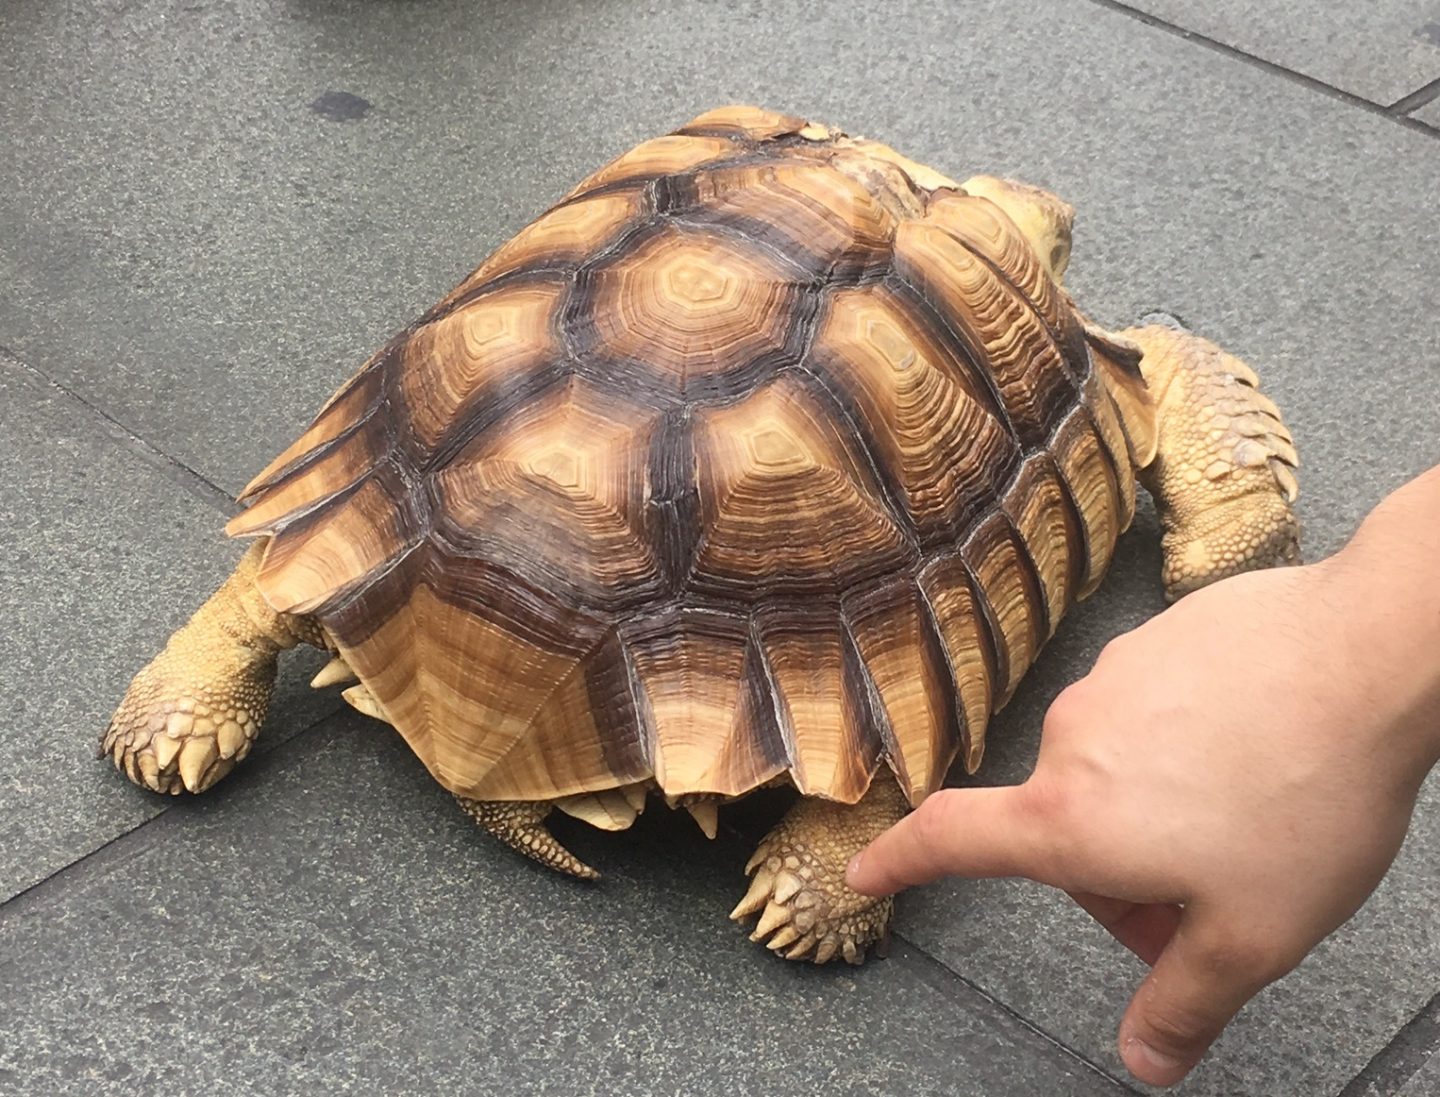 Tortoise in Hong Kong making its' own itinerary